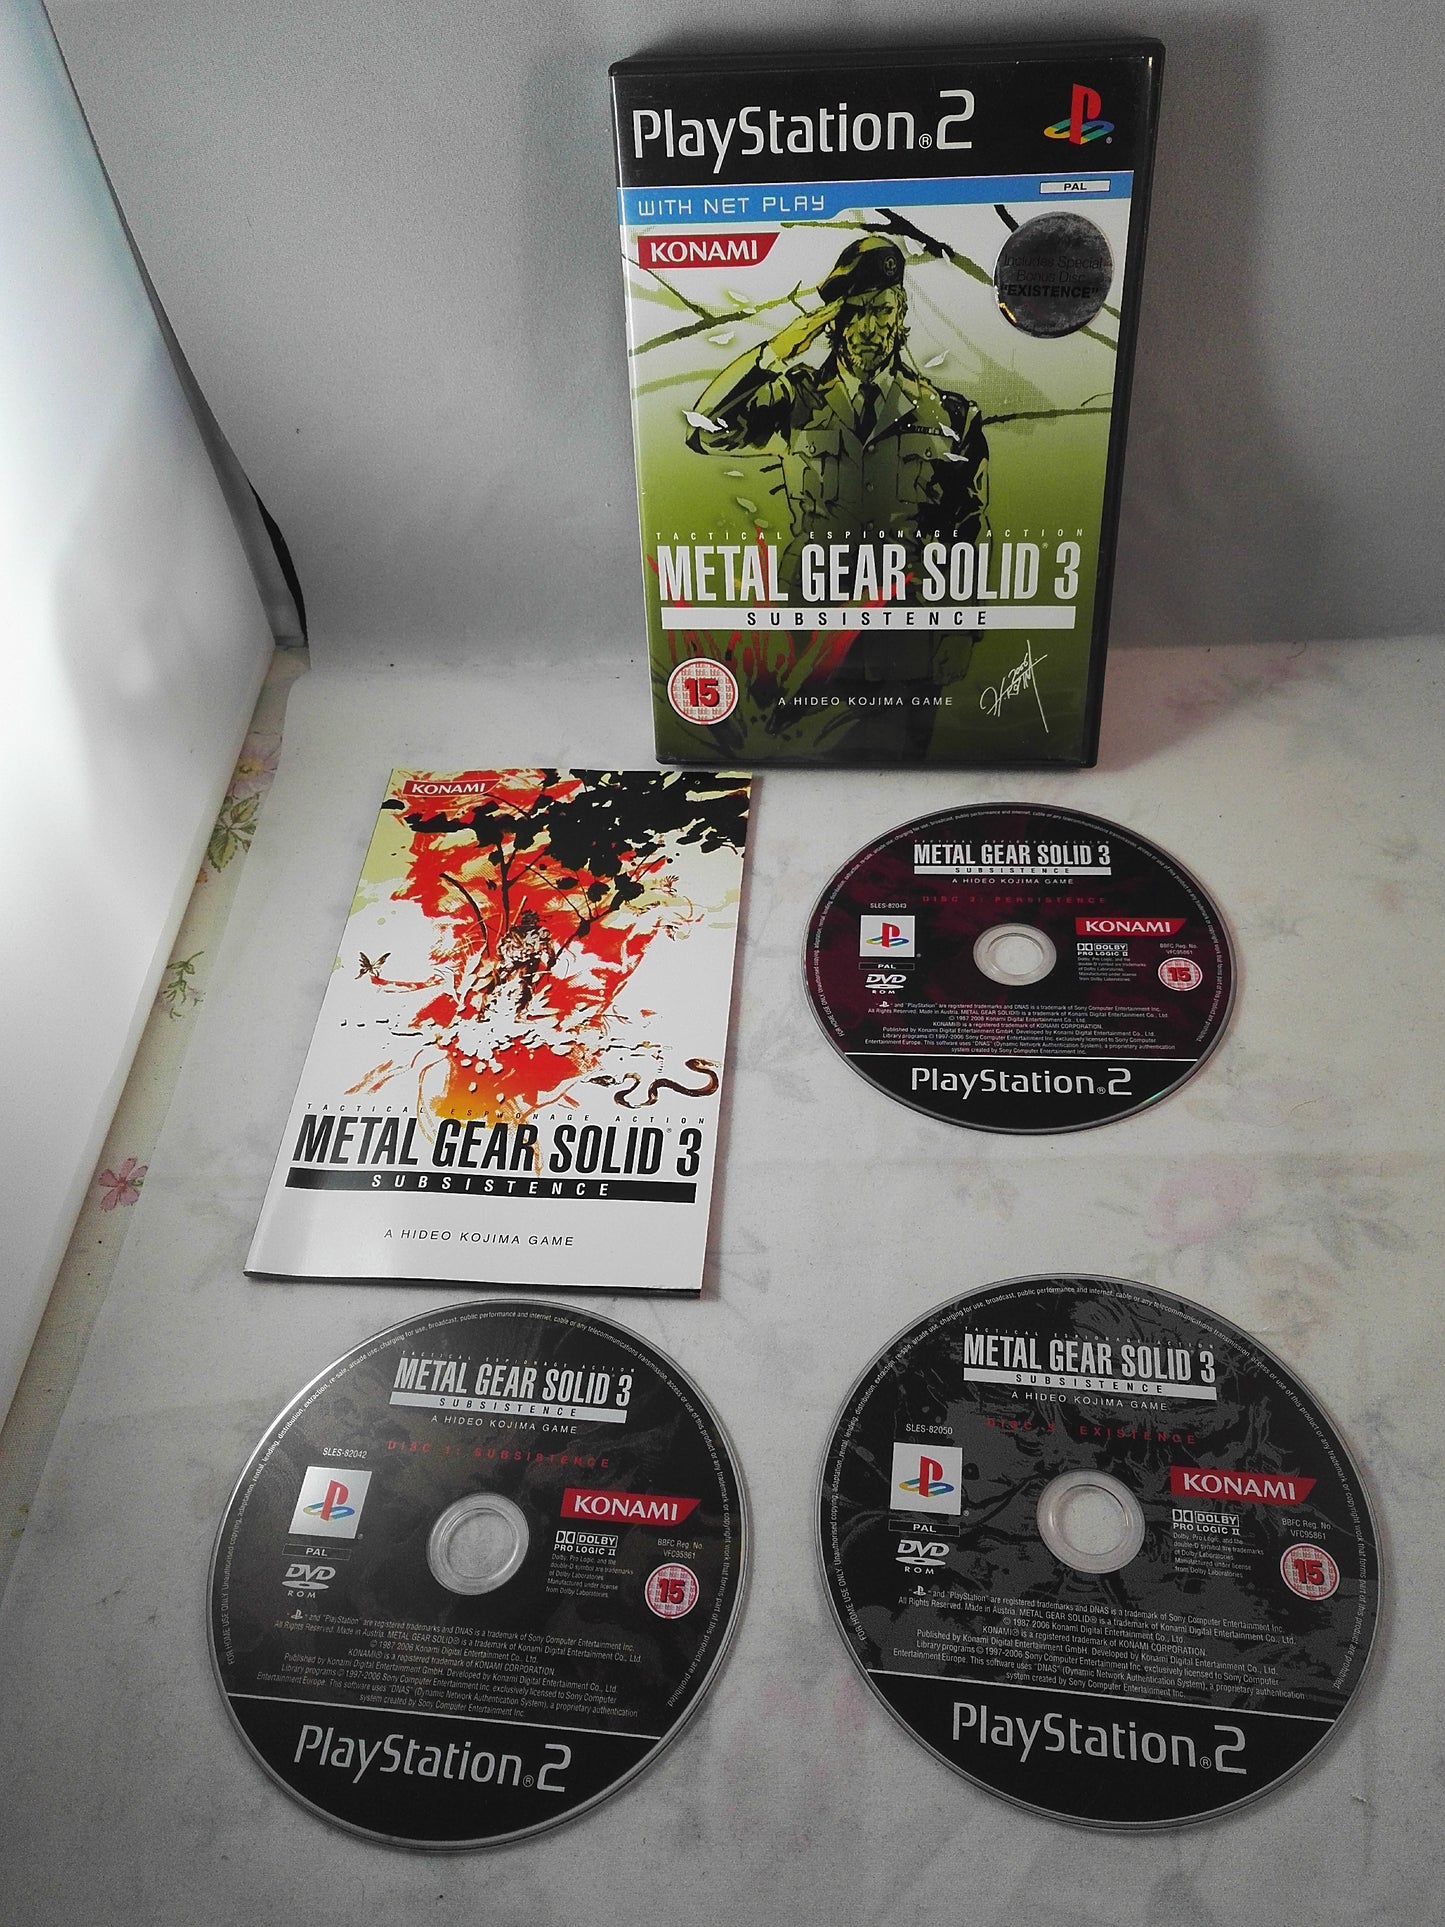 Metal Gear solid 3 Subsistence PS2 (Sony Playstation 2) game